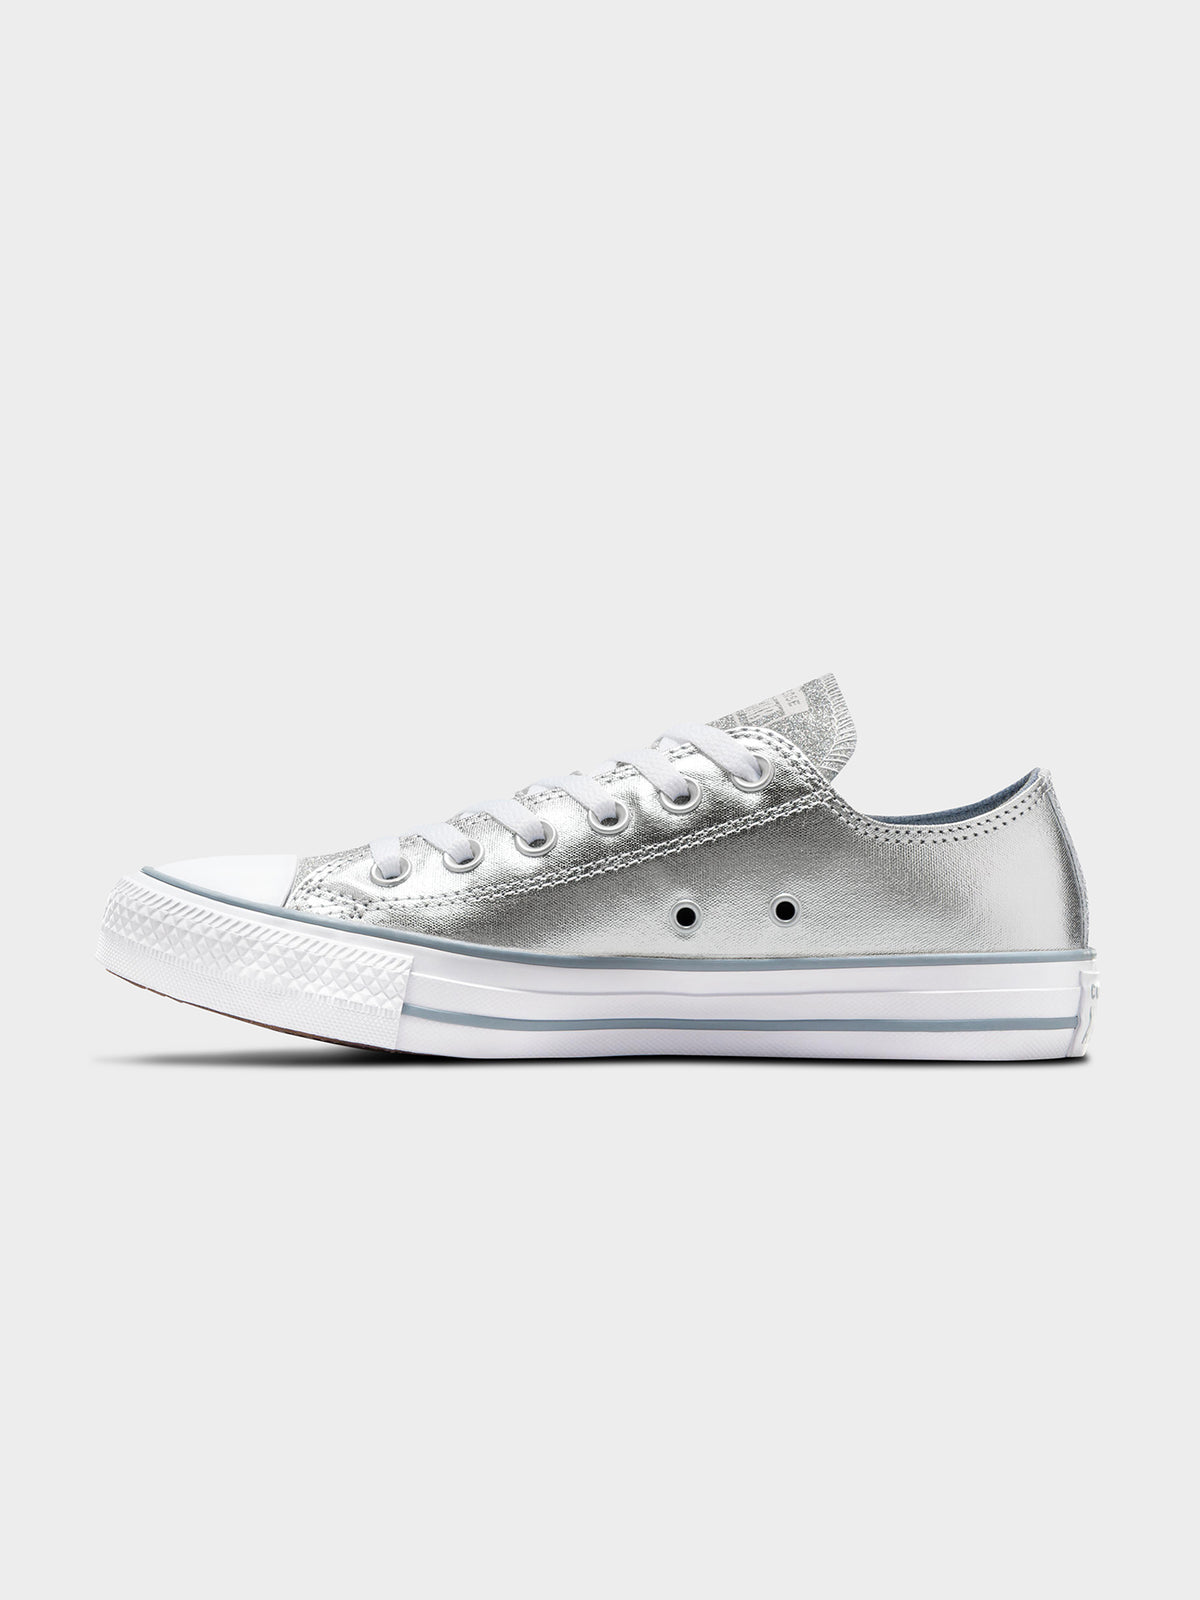 Unisex Chuck Taylor All Star Sparkle Party Low Top Sneakers in Metallic Granite